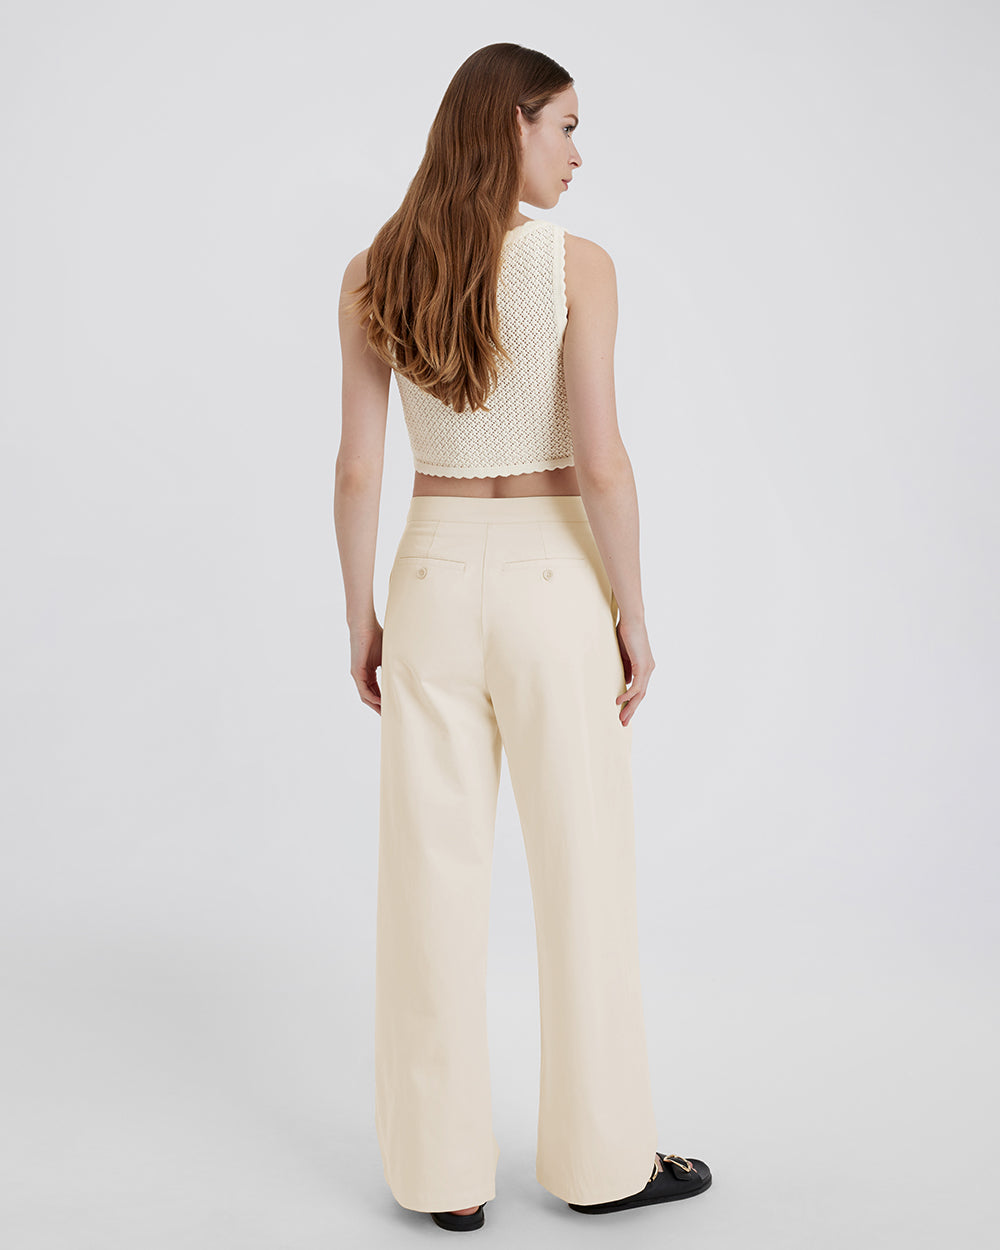 The Tori Pant - Solid & Striped